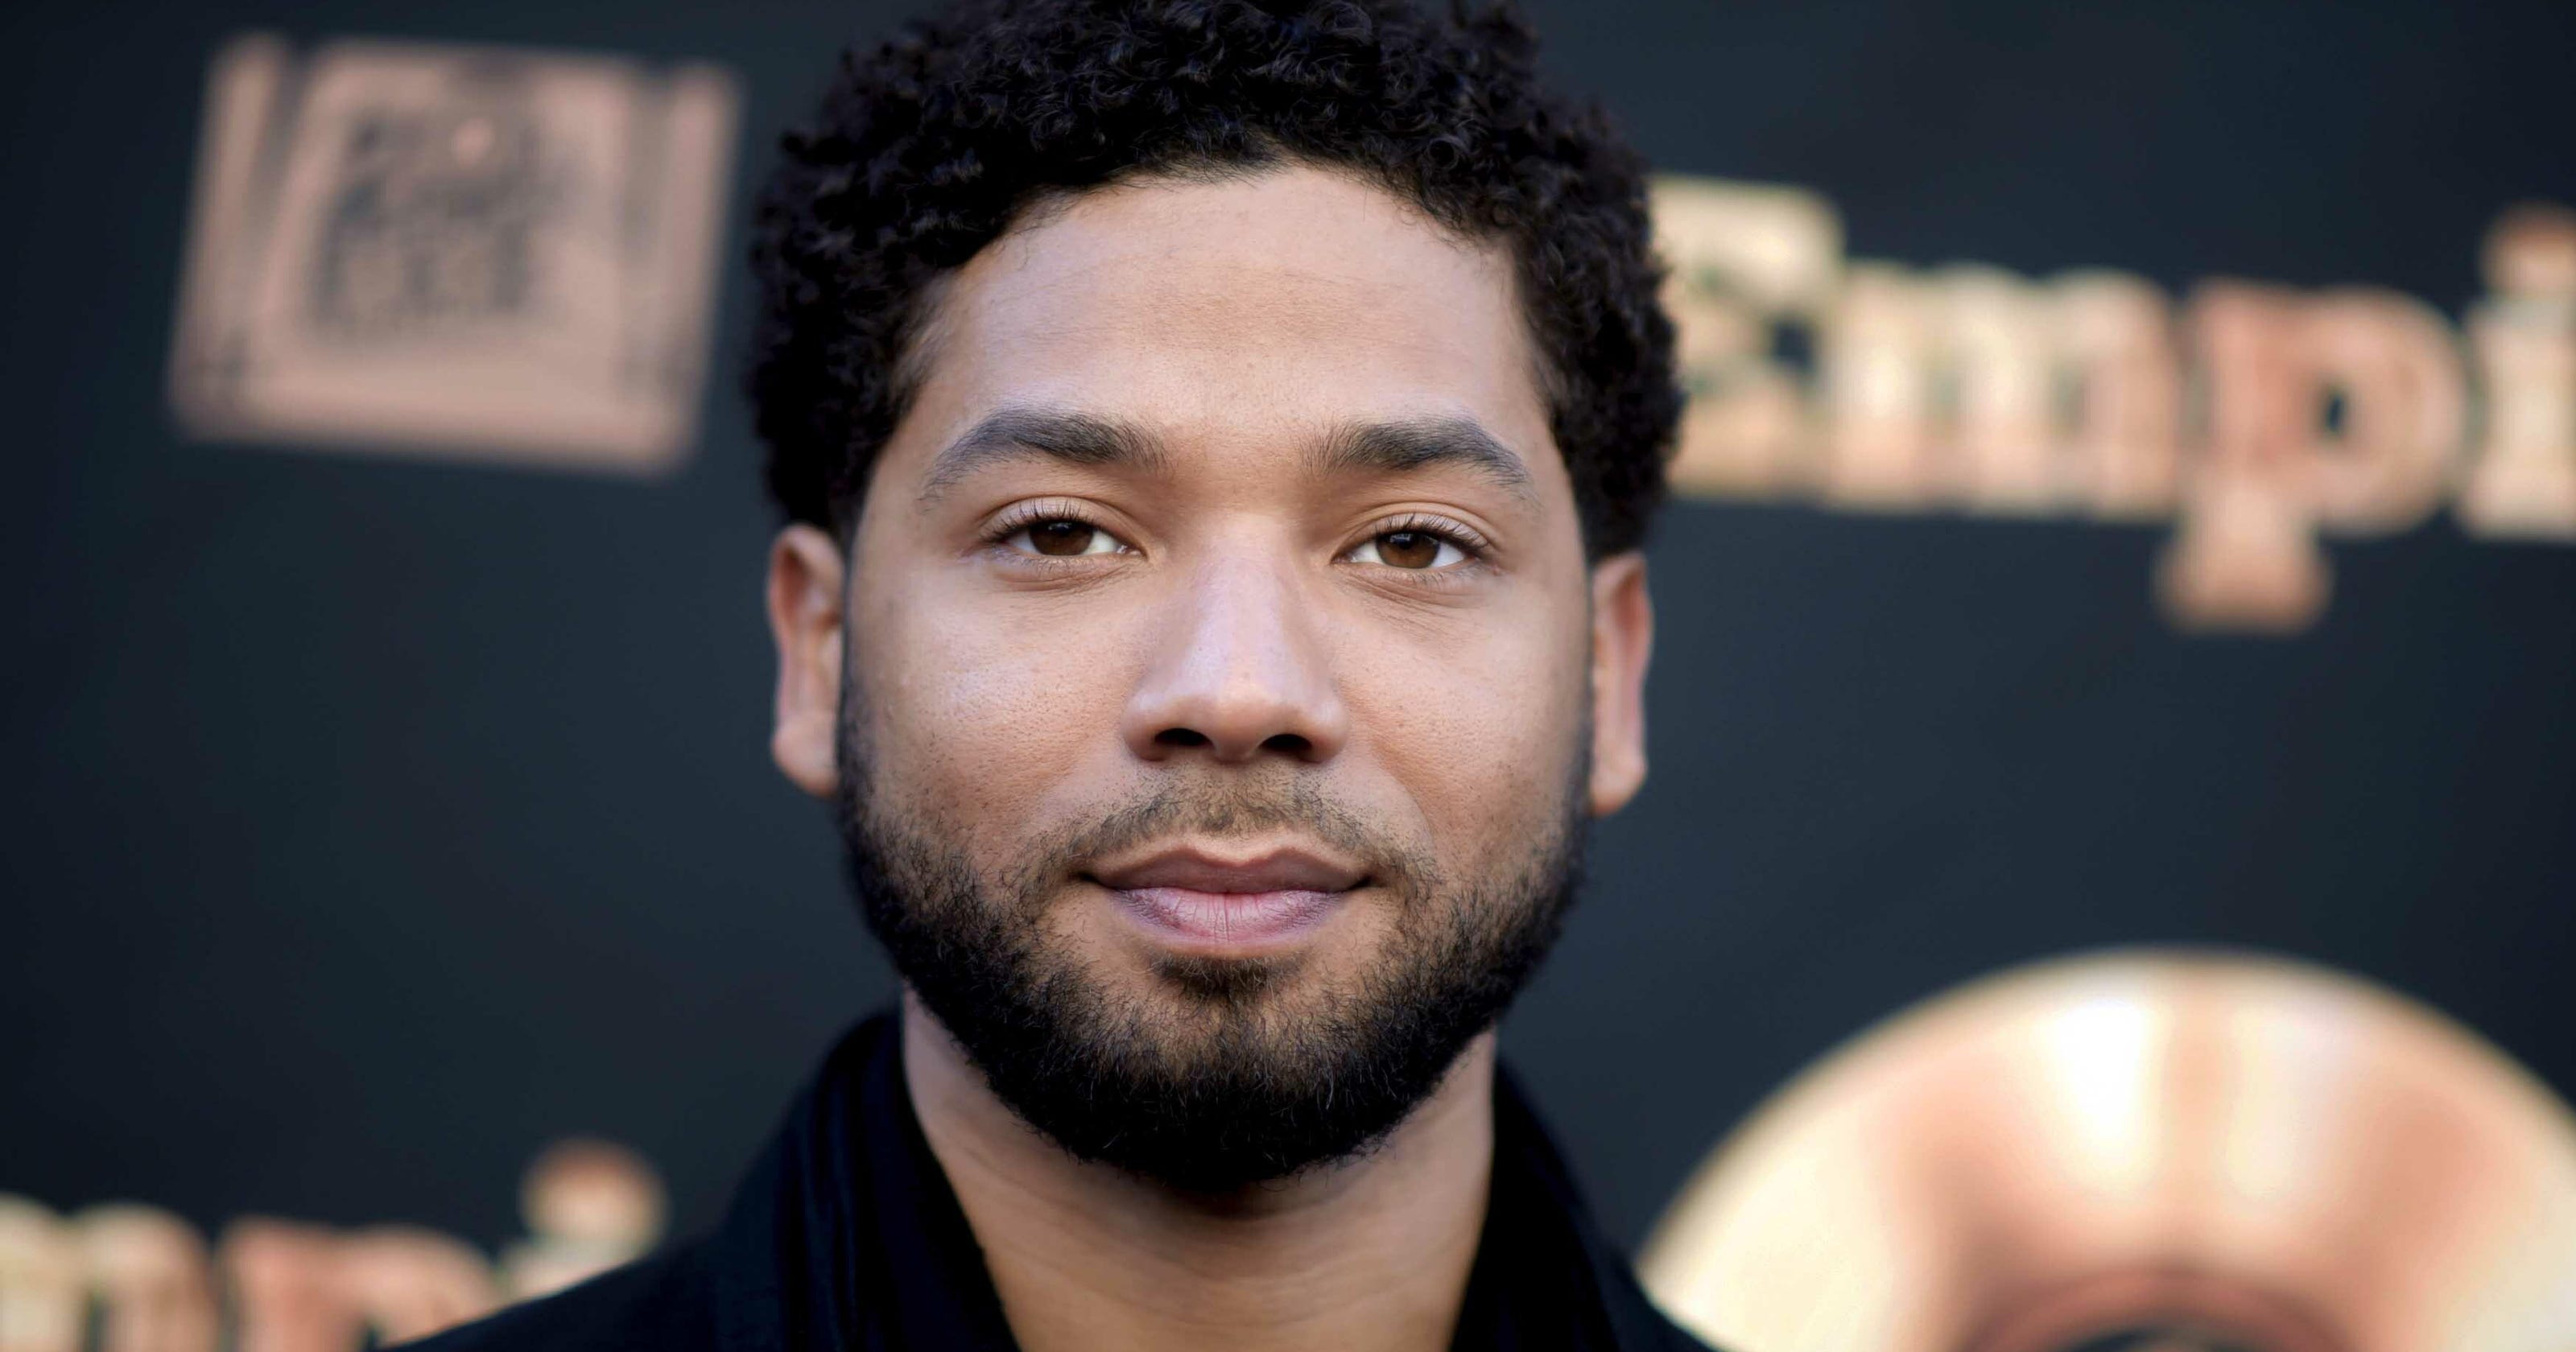 Police: ‘Empire’ actor Jussie Smollett arrived home with rope around neck3200 x 1680